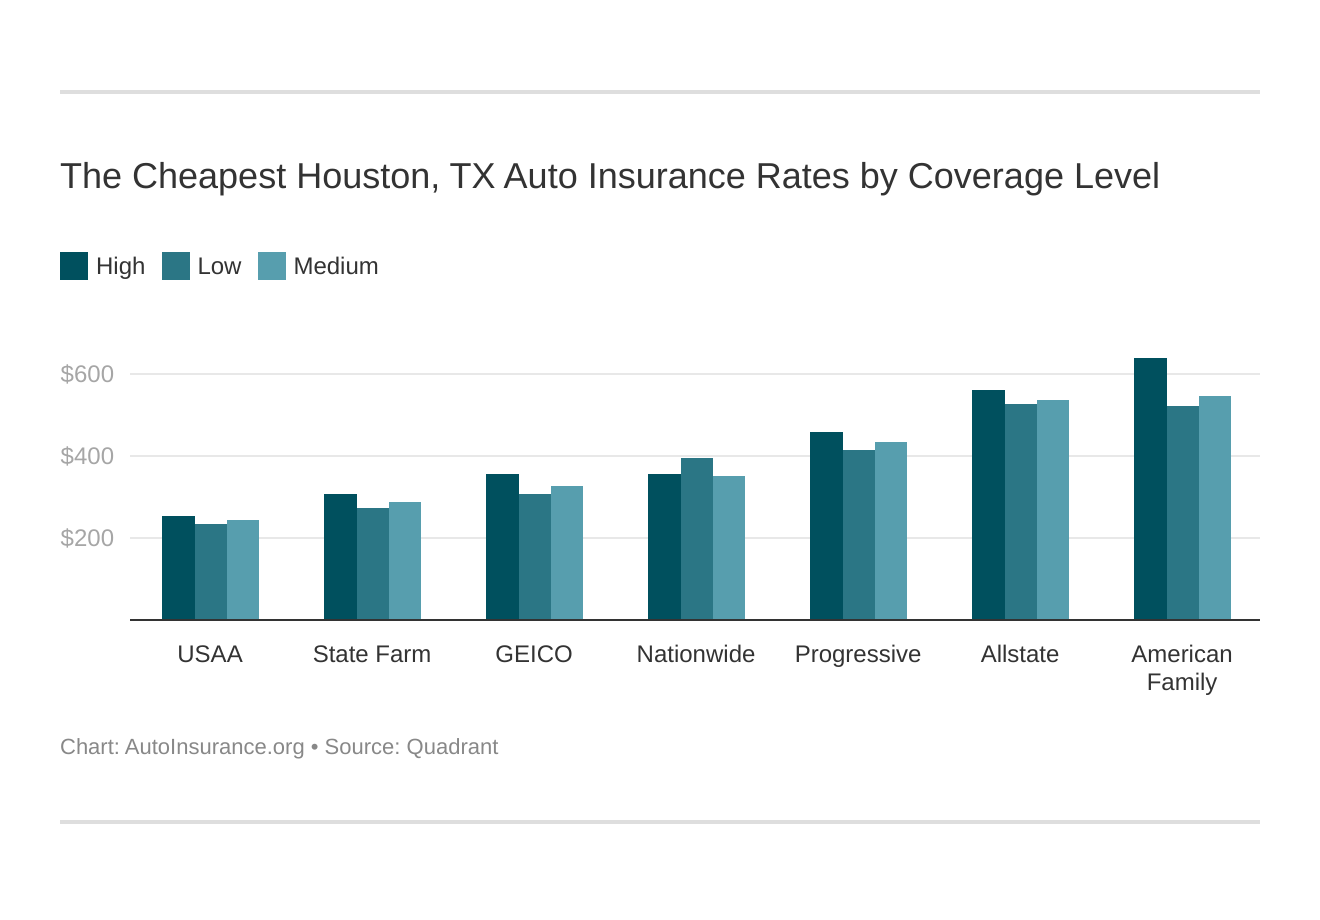 The Cheapest Houston, TX Auto Insurance Rates by Coverage Level